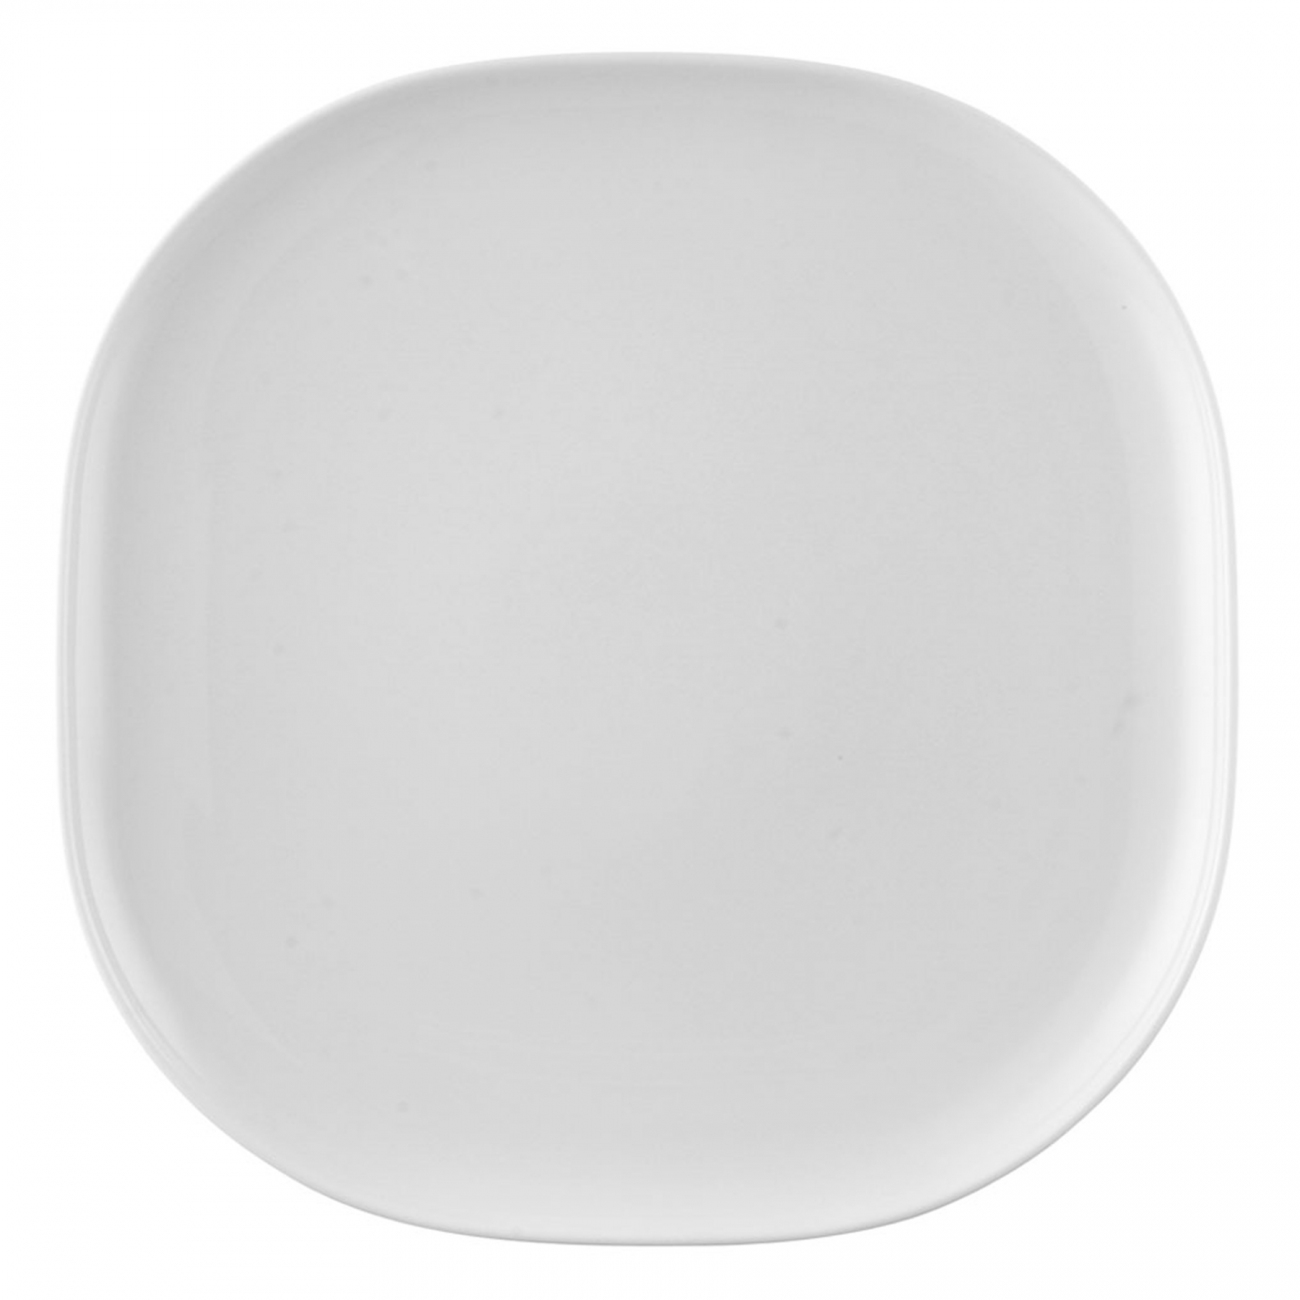 Rosenthal MOON Weiss Piatto Ovale